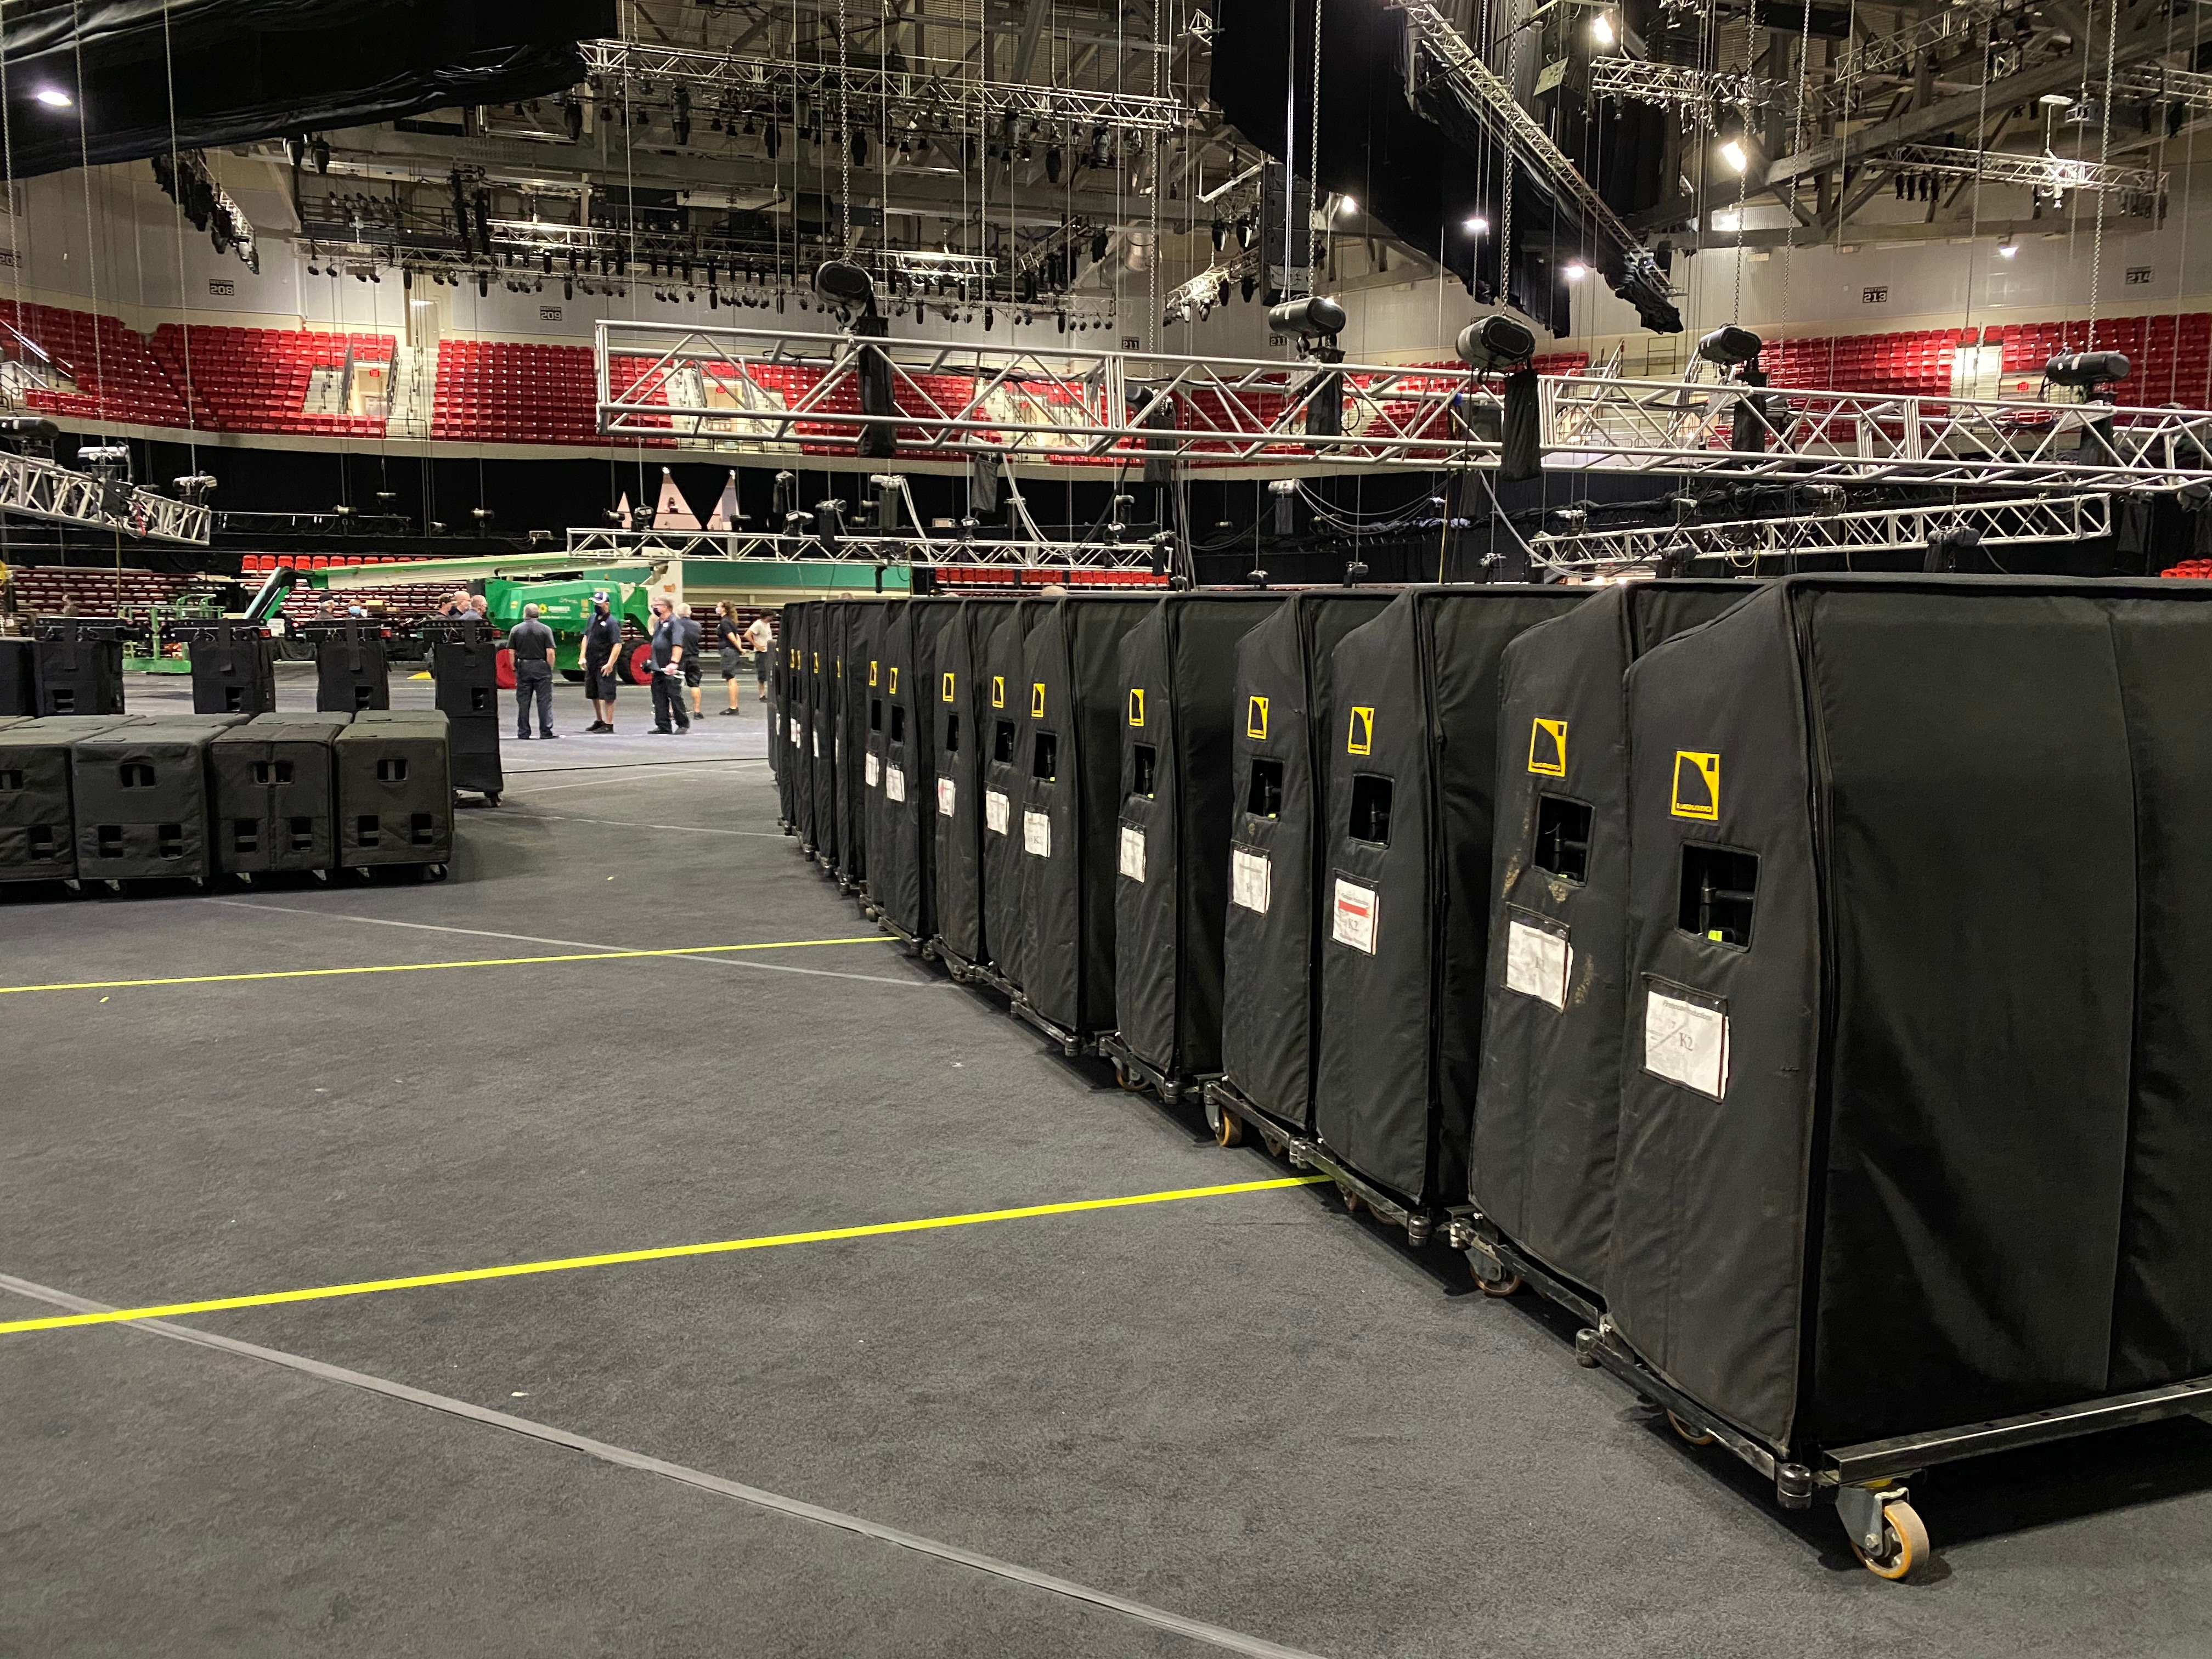 The system design ended up being a 10.6 surround setup that encircles the arena floor — aimed at the court instead of at the fans, as would normally be the case. A separate system was also installed for COVID-tested audience members from the Bubble community. | AVIXA